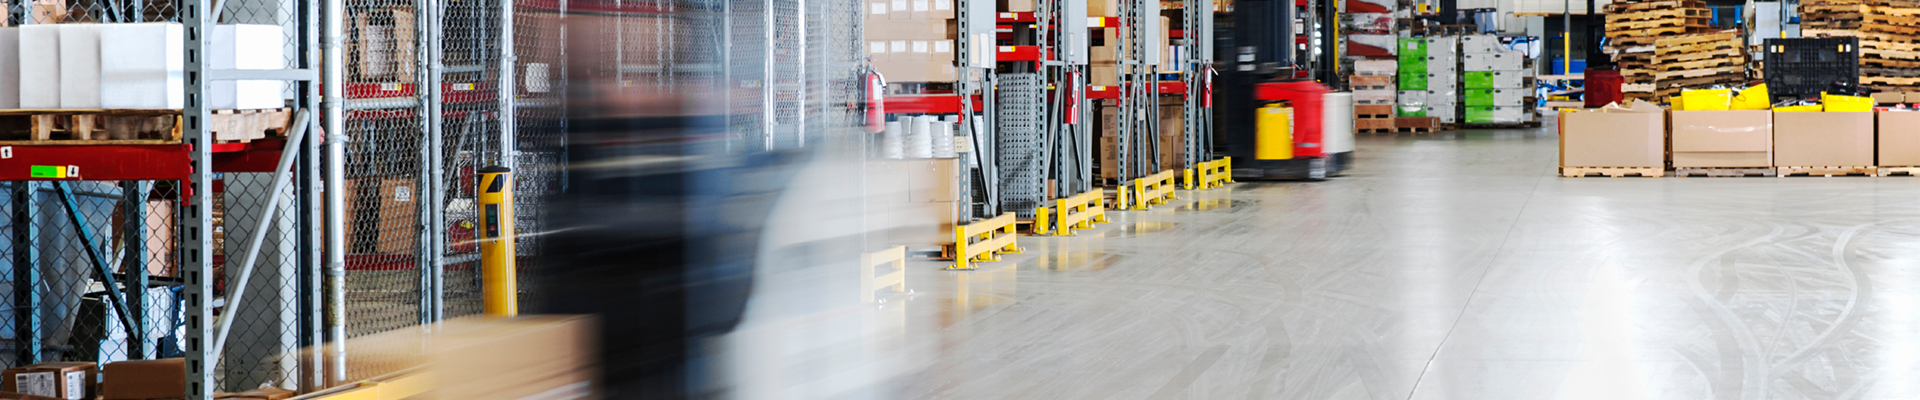 4 Benefits of an Organised Warehouse